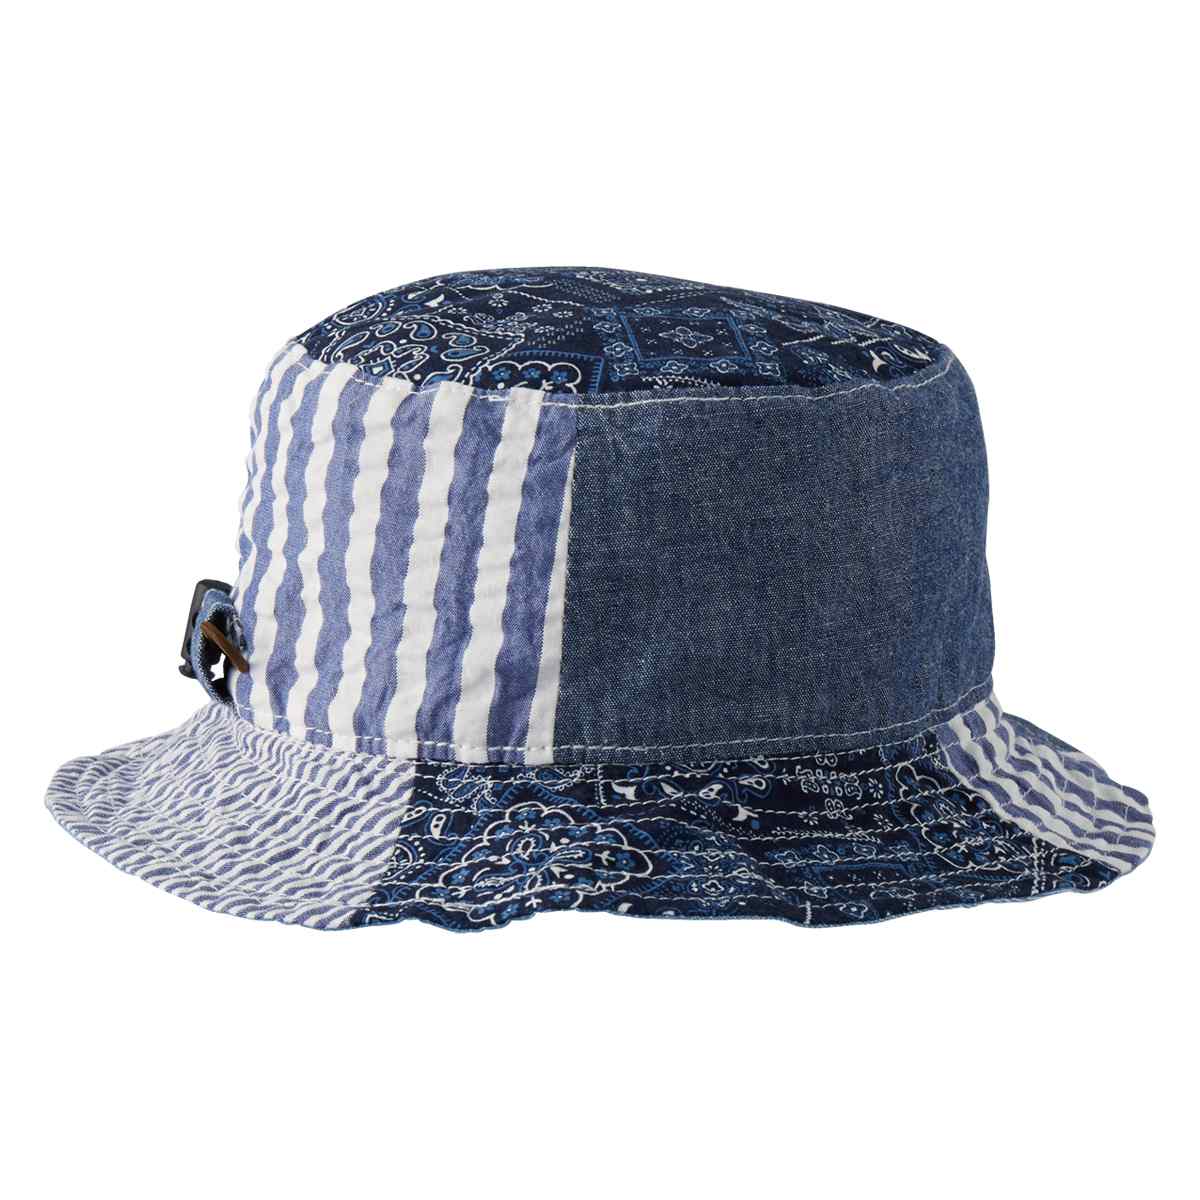 DOUBLE_B Reversible Patchwork Bucket Hat (UV Protection)